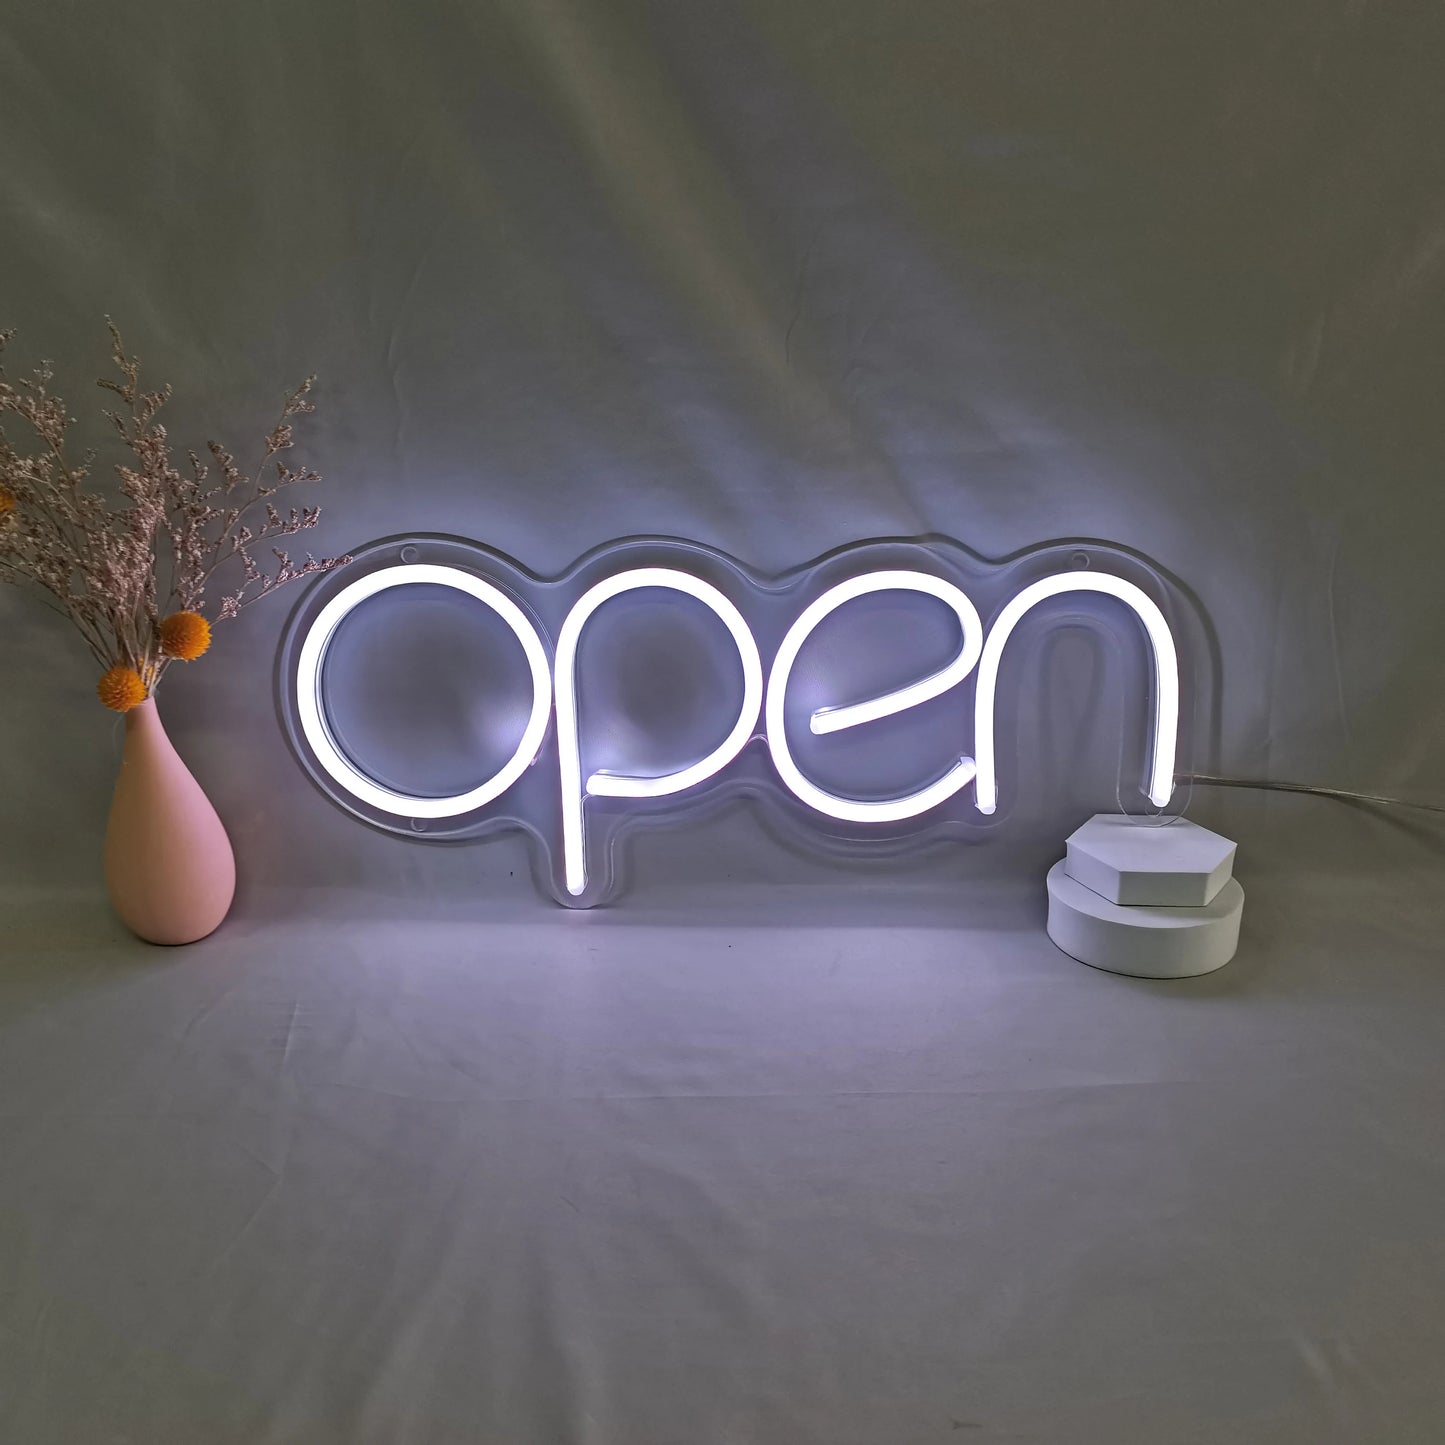 Led Open Neon Sign